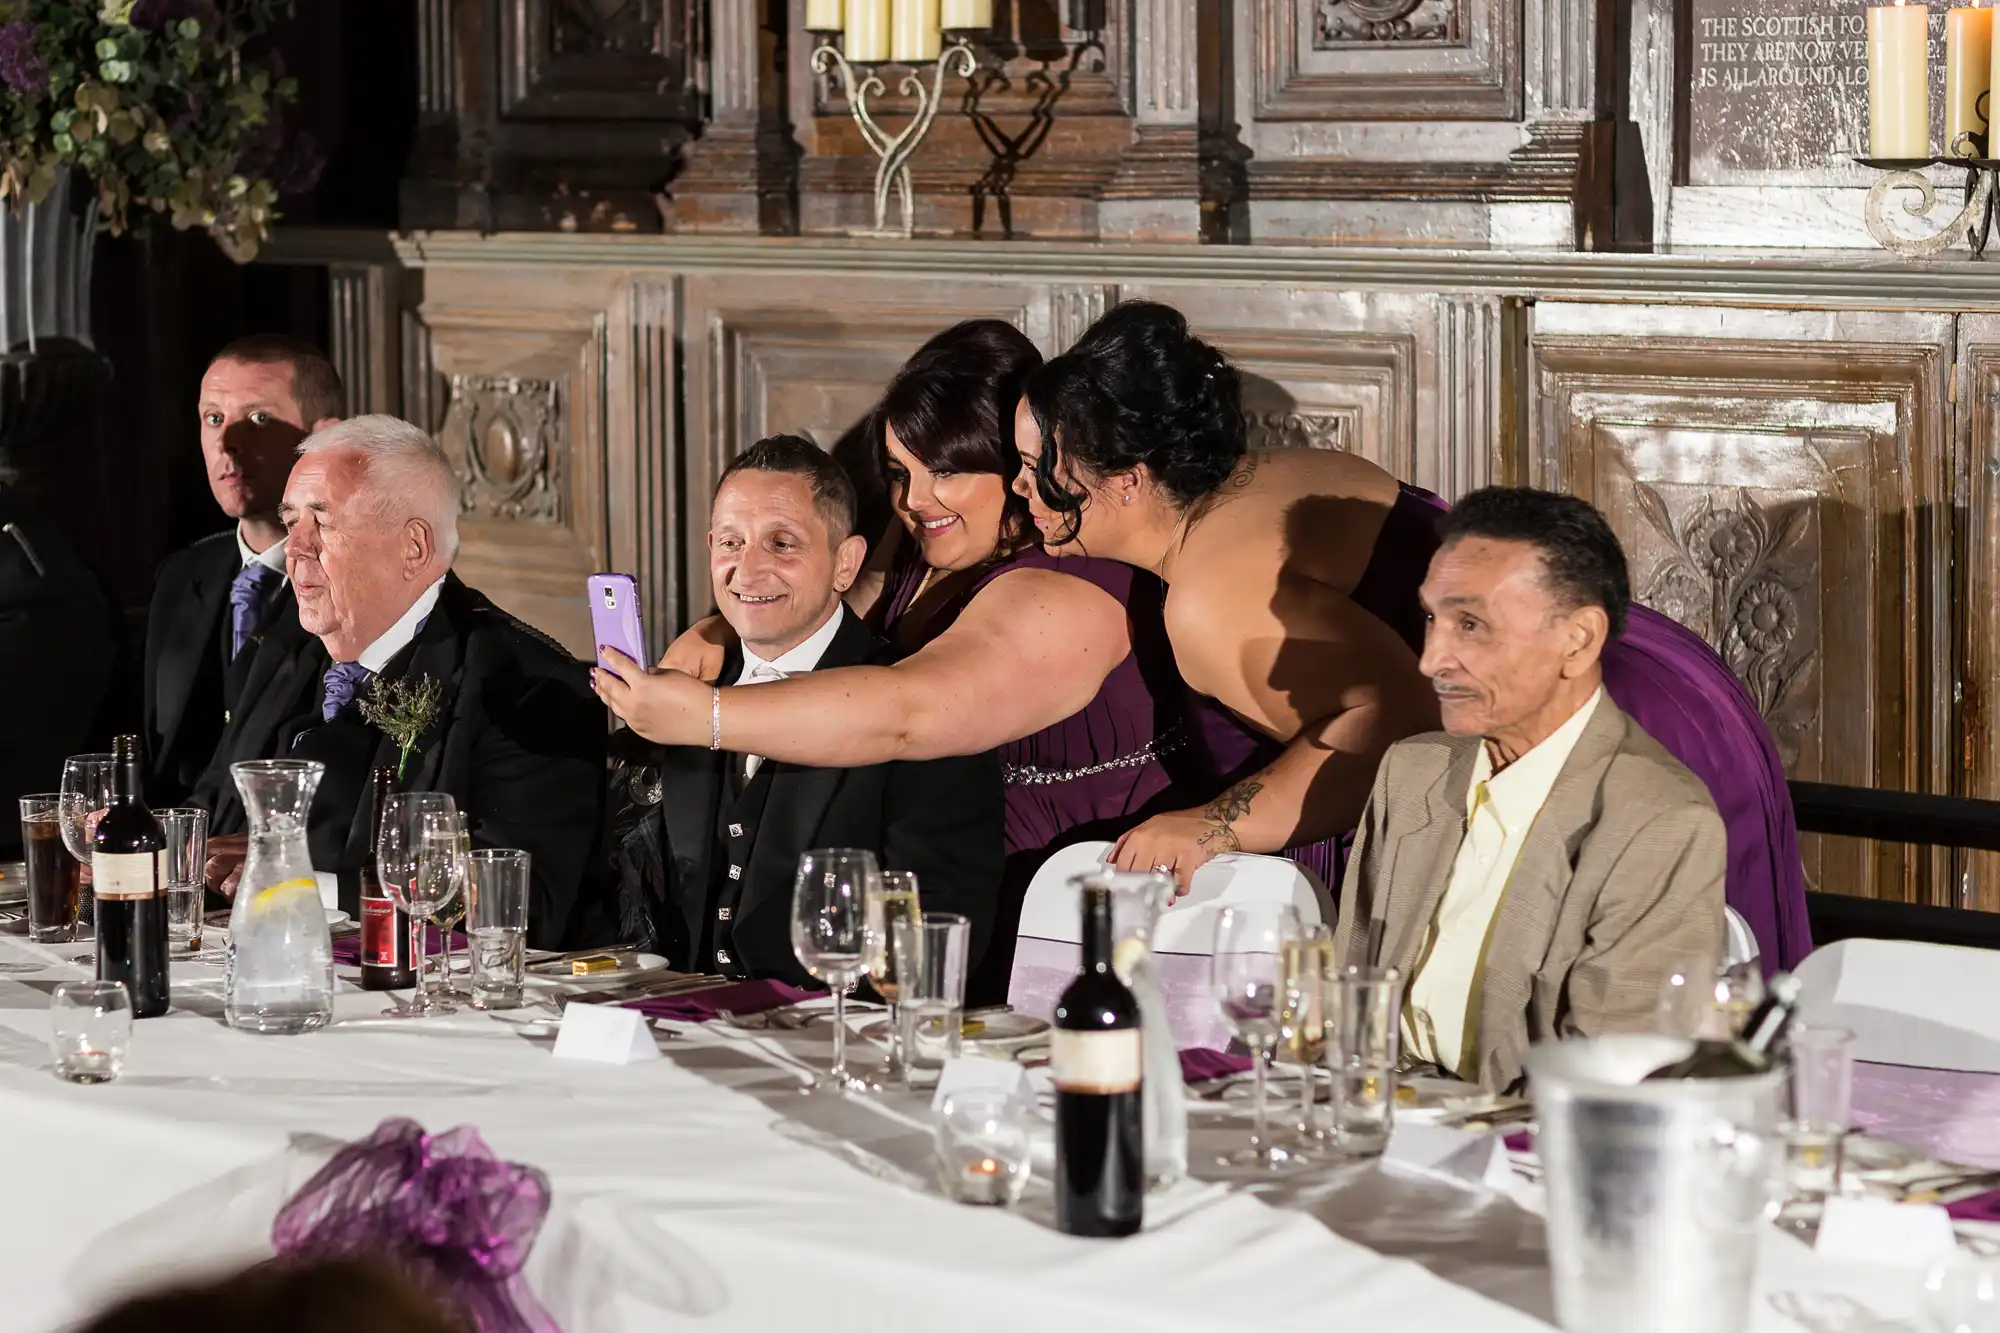 A group at a wedding banquet table takes a selfie, smiling, in an ornately decorated room with chandeliers and candles.